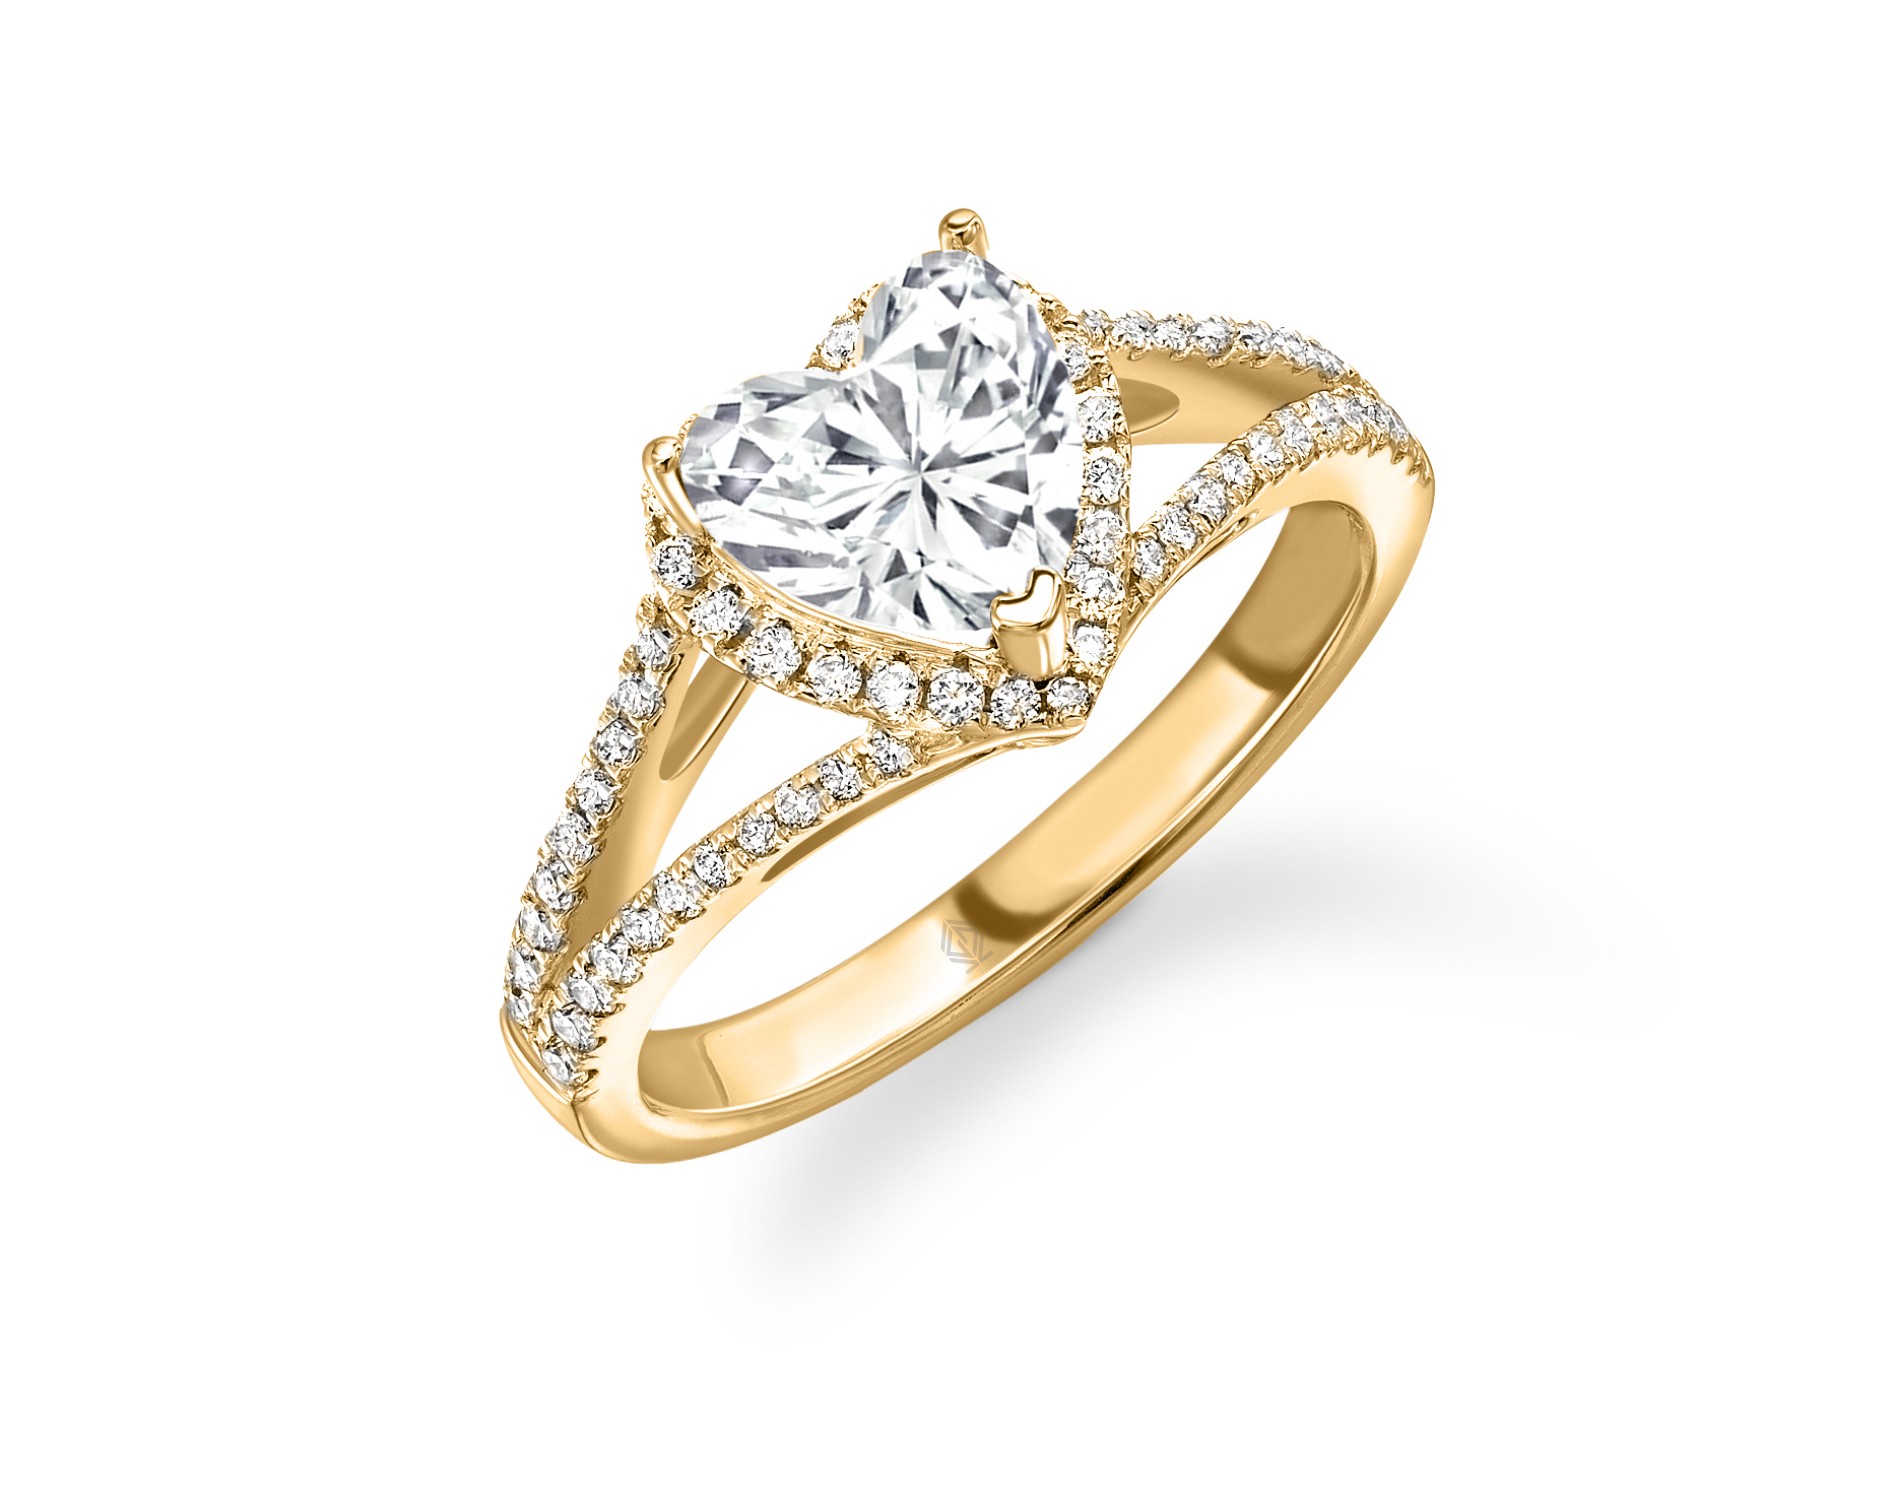 18K YELLOW GOLD HEART CUT HALO DIAMOND ENGAGEMENT RING WITH SIDE STONES IN SPLIT SHANK PAVE SET